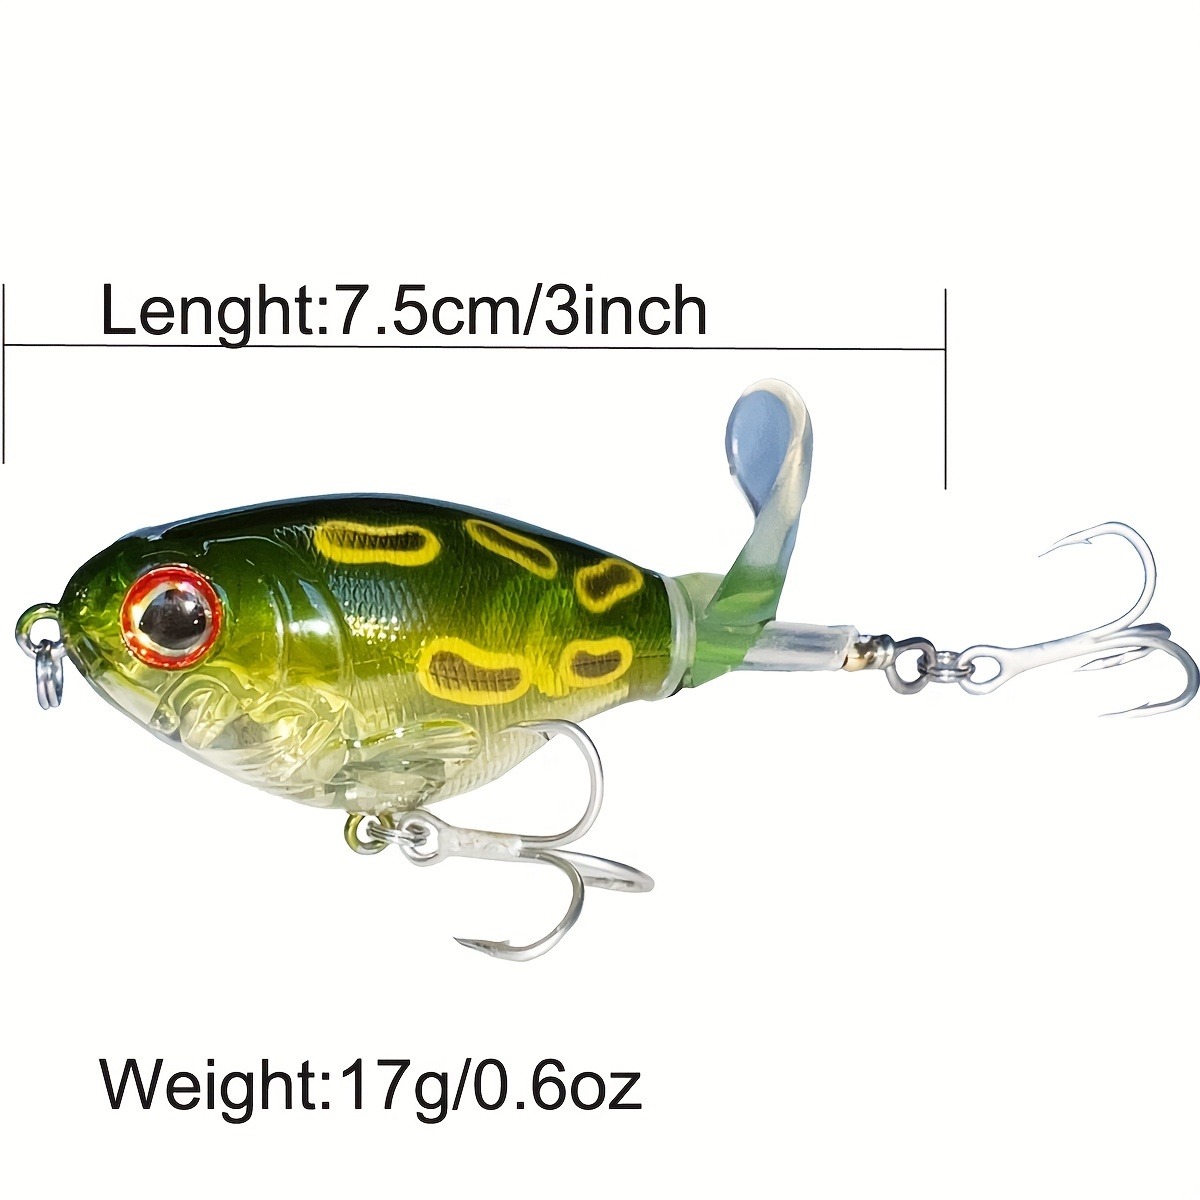 Top Water Mouse Fishing, Mouse Topwater Lure, Fishing Lures Mouse